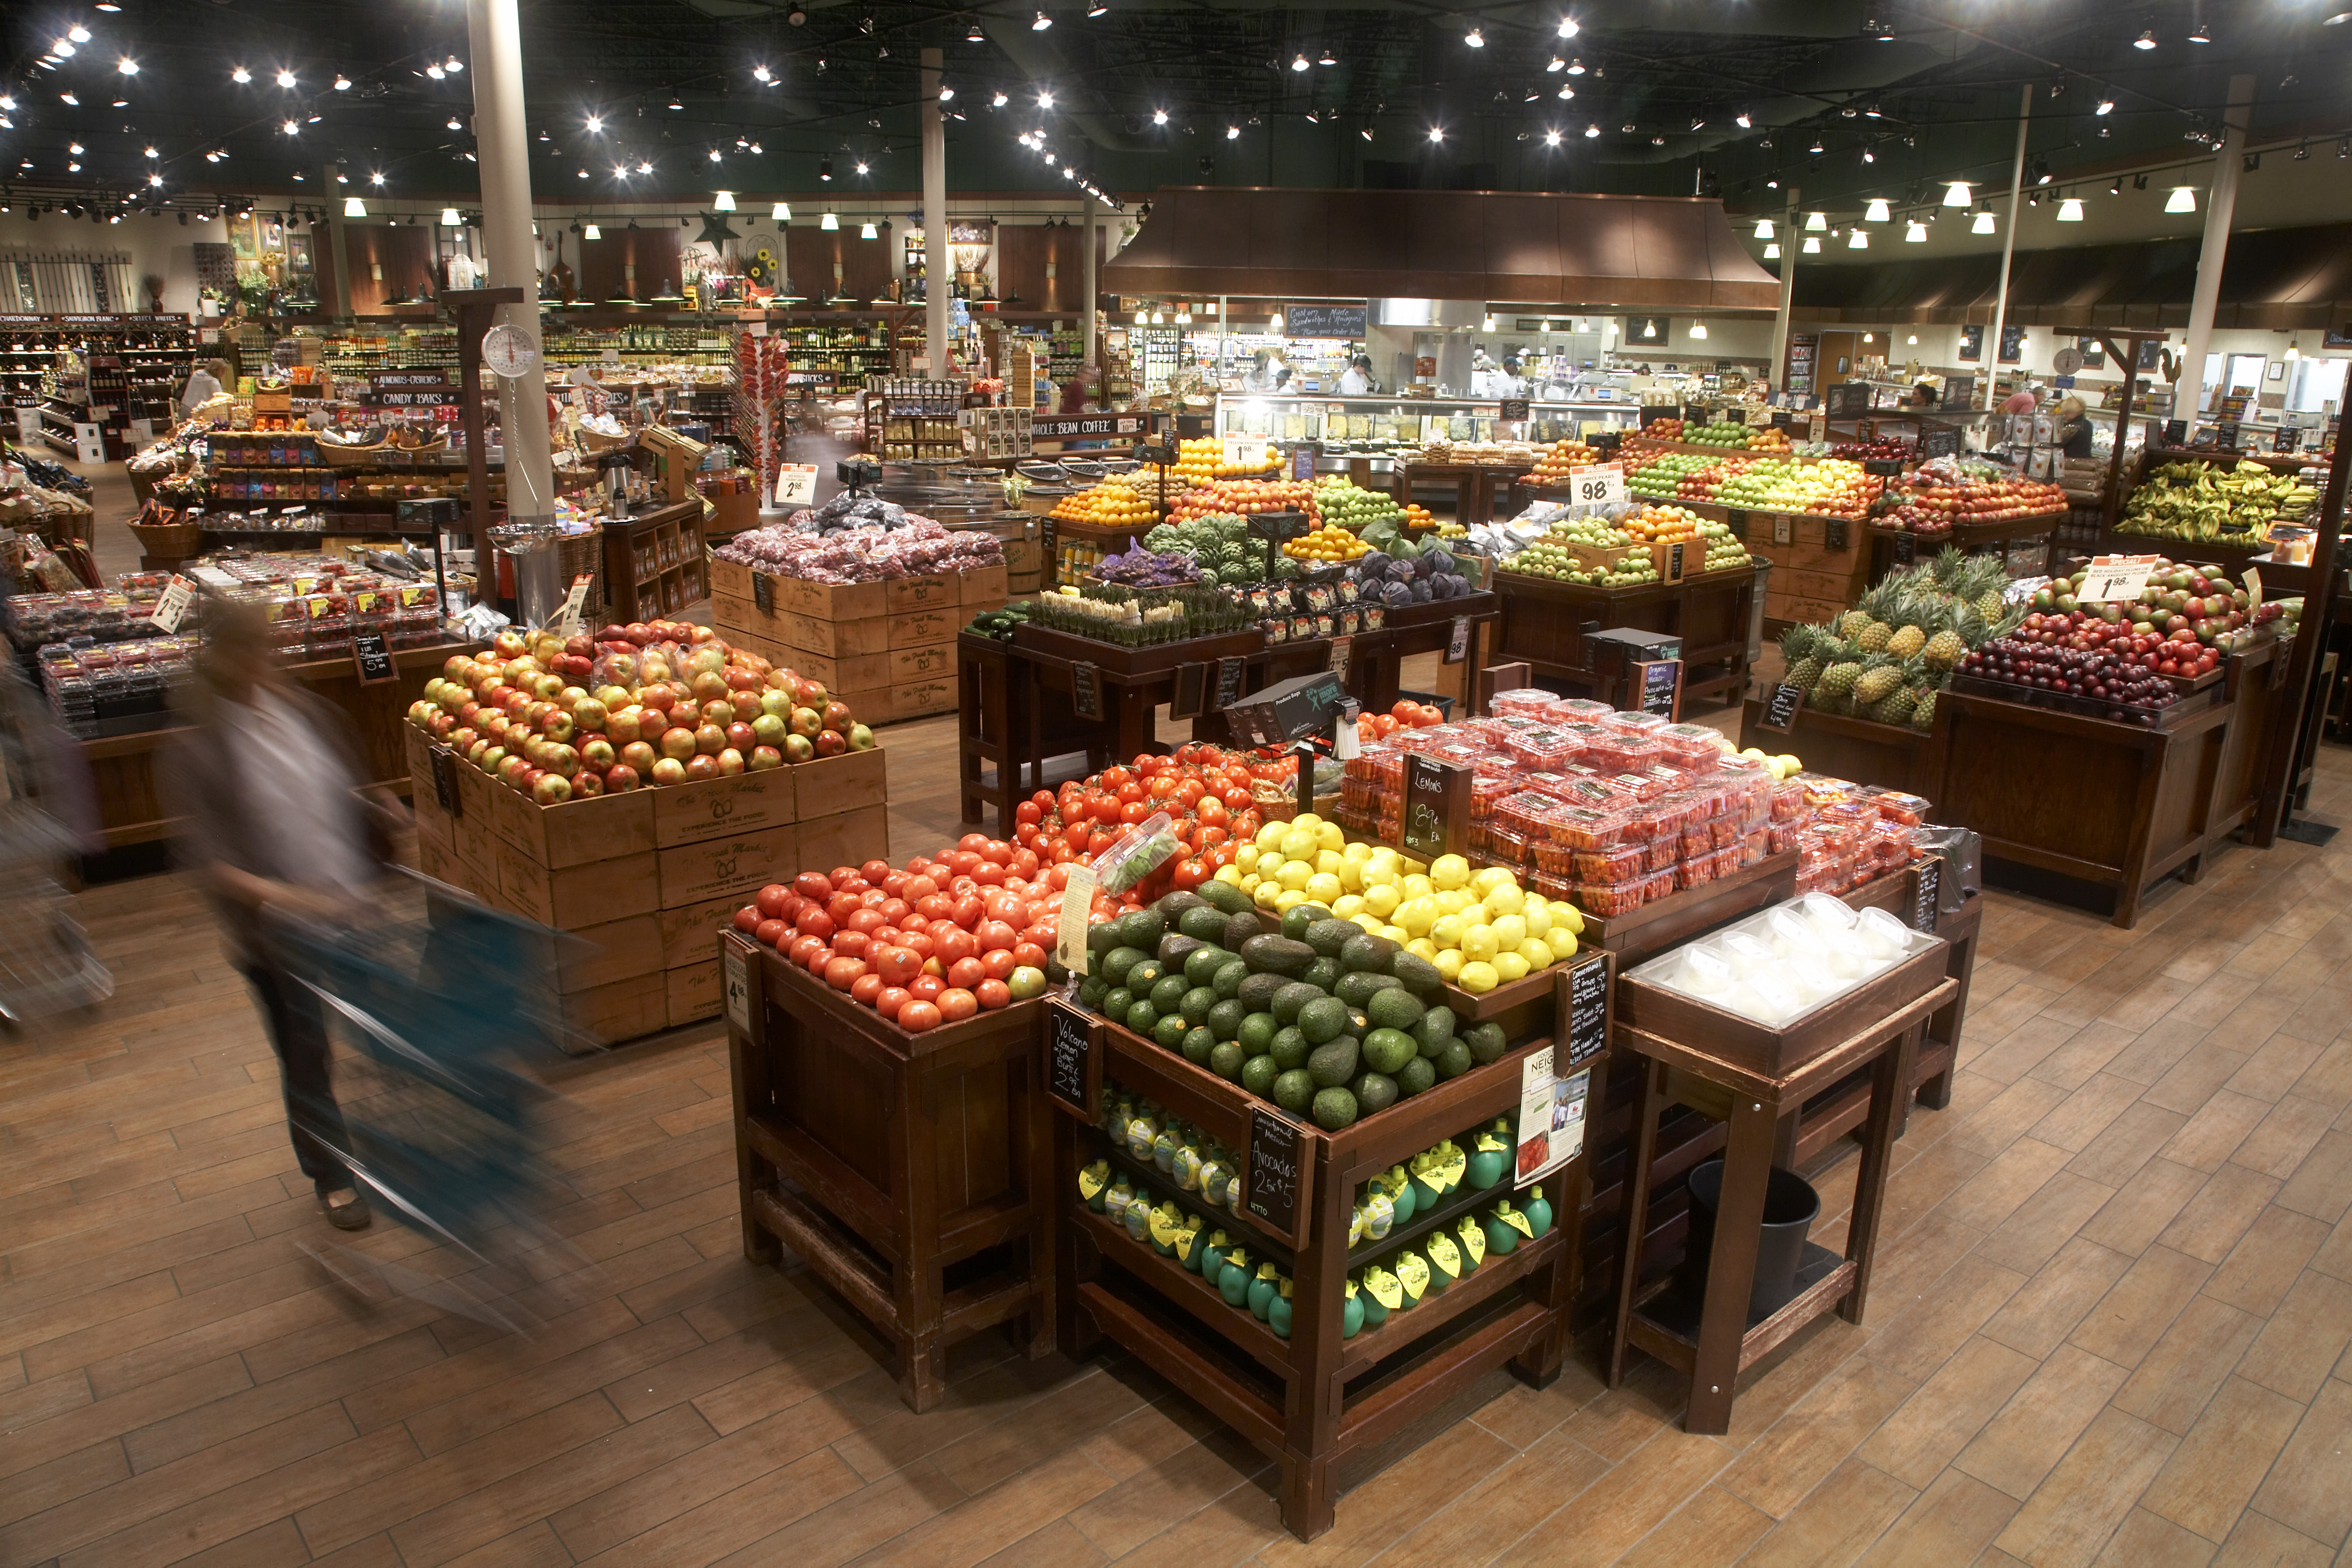 The Fresh Market brings their unique shopping experience to Trussville